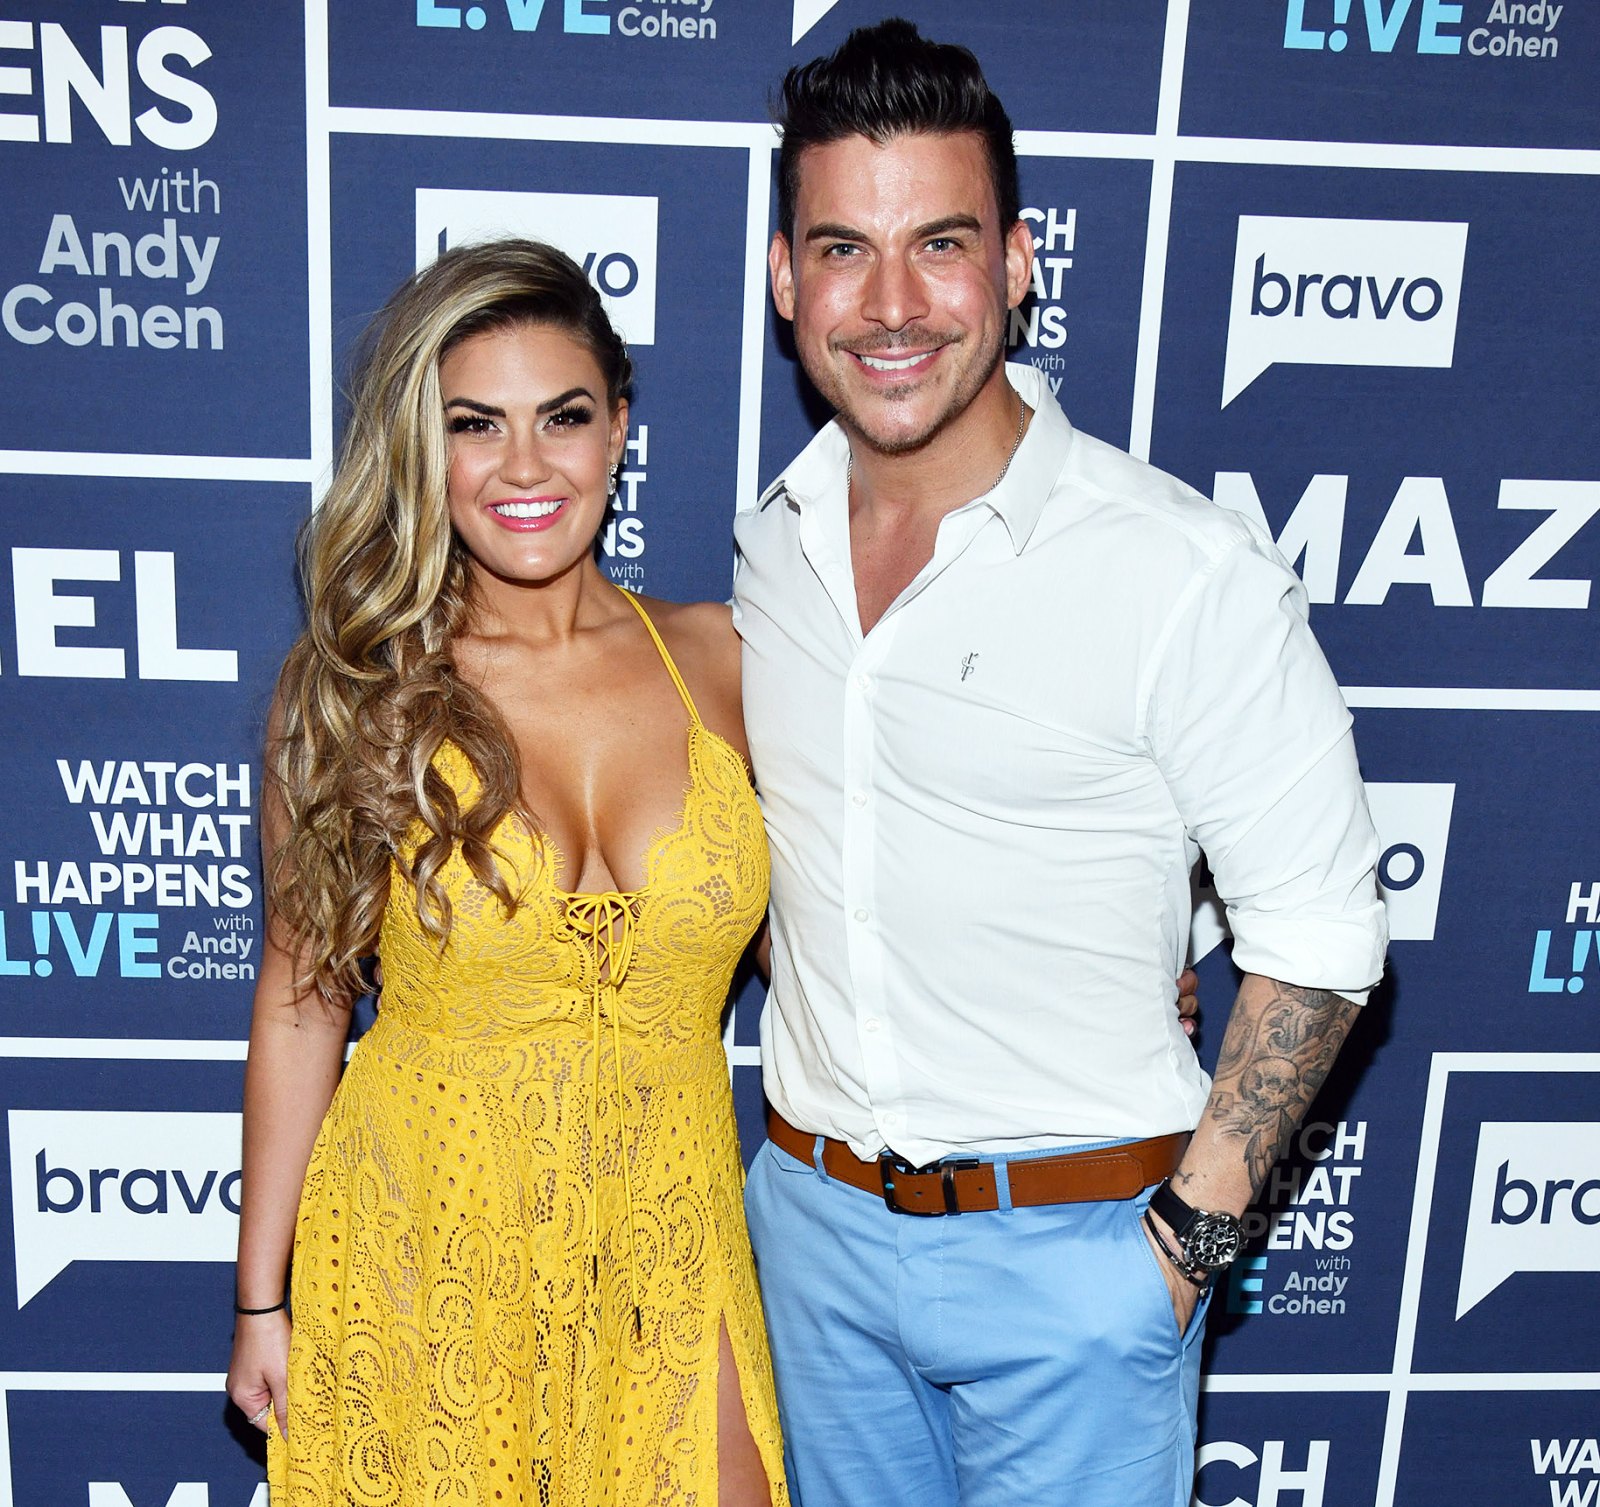 Vanderpump Rules Jax Taylor and Brittany Cartwright on Watch What Happens Live With Andy Cohen Wed in Kentucky